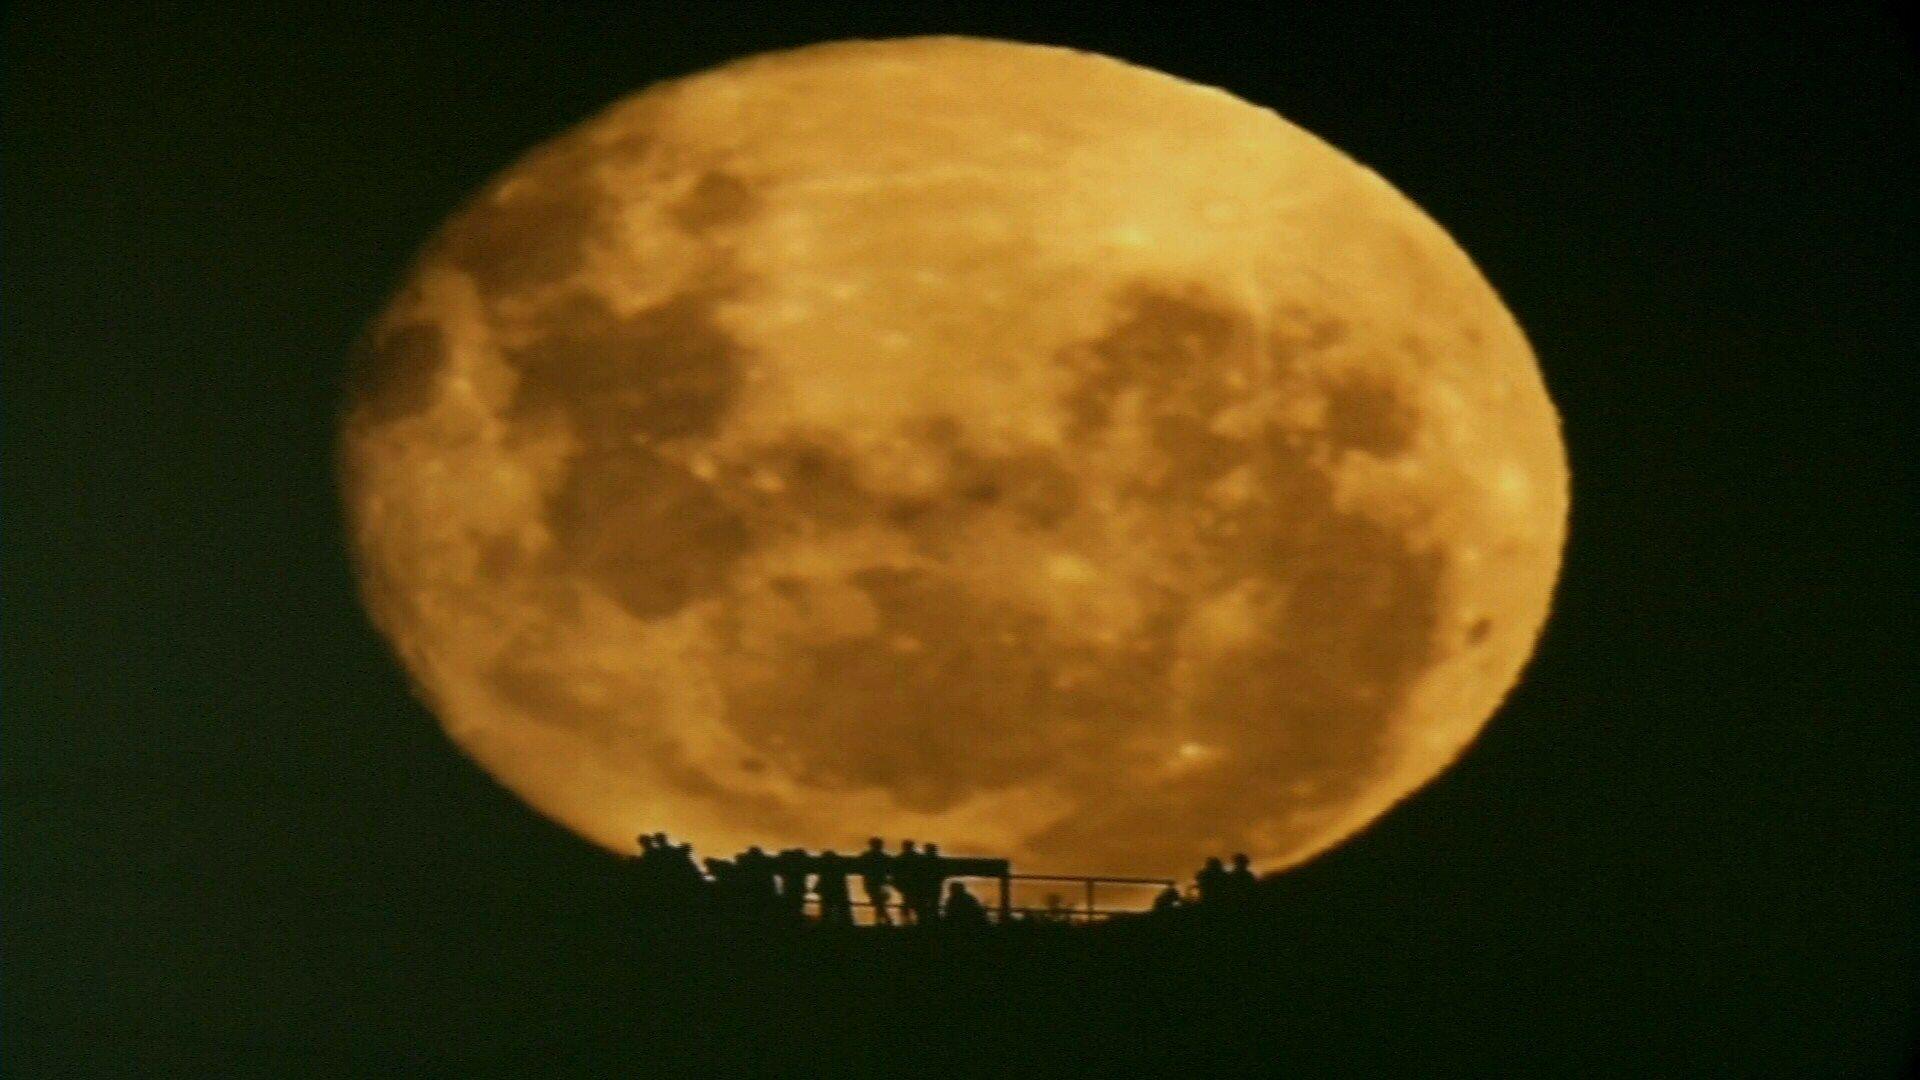 Its been years since the last super blue blood moon